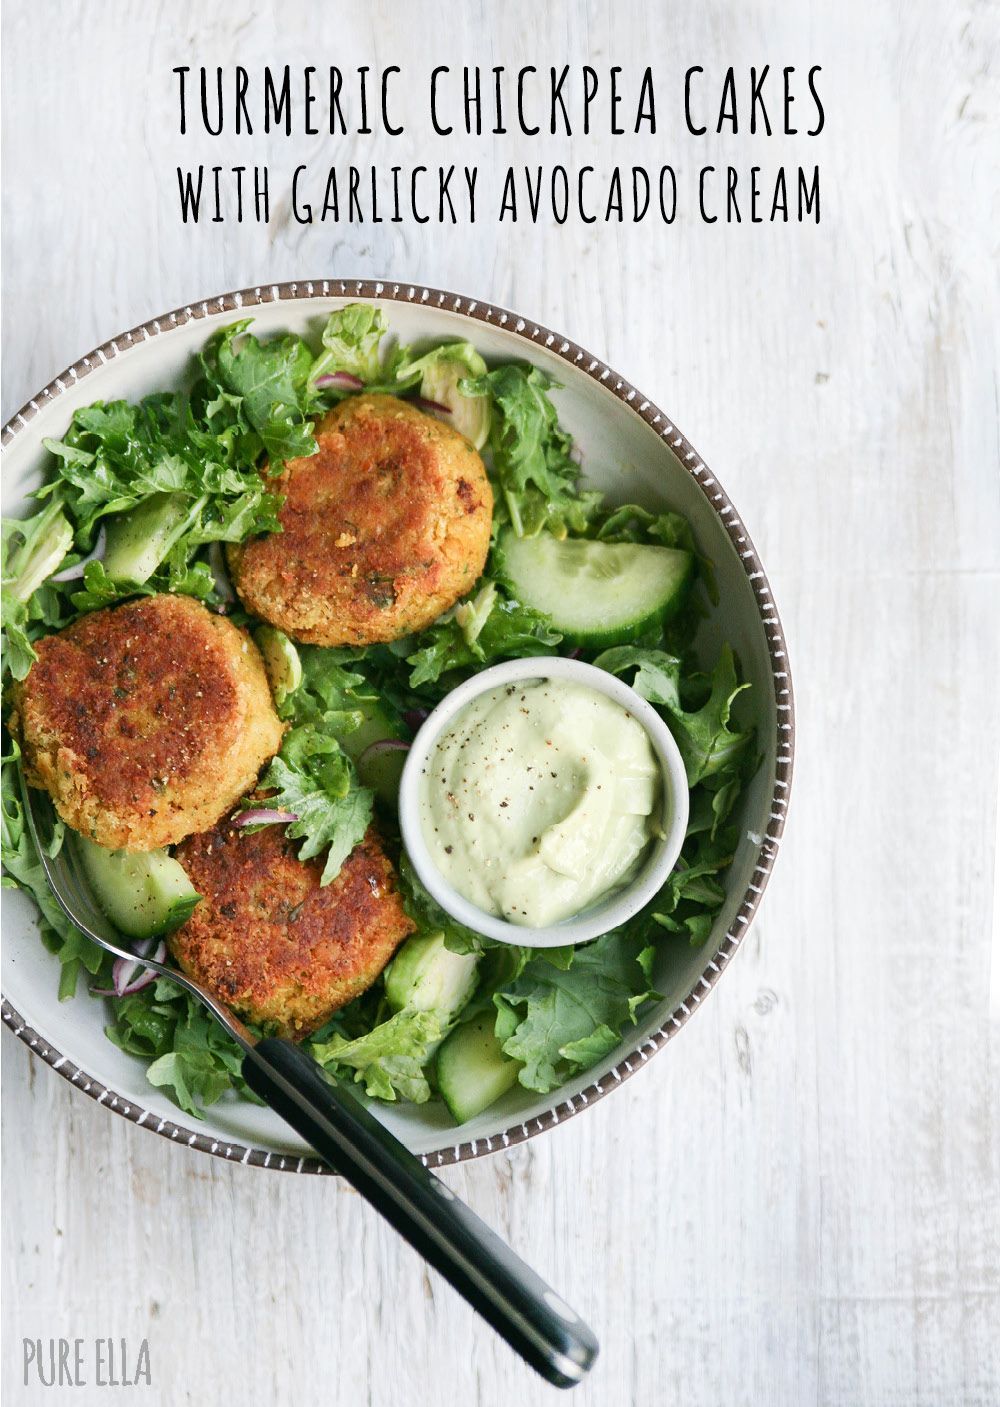 Deliciously simple, easy and healthy Turmeric Chickpea Cakes/ Burgers. Naturally gluten free, grain free, egg free, dairy free/